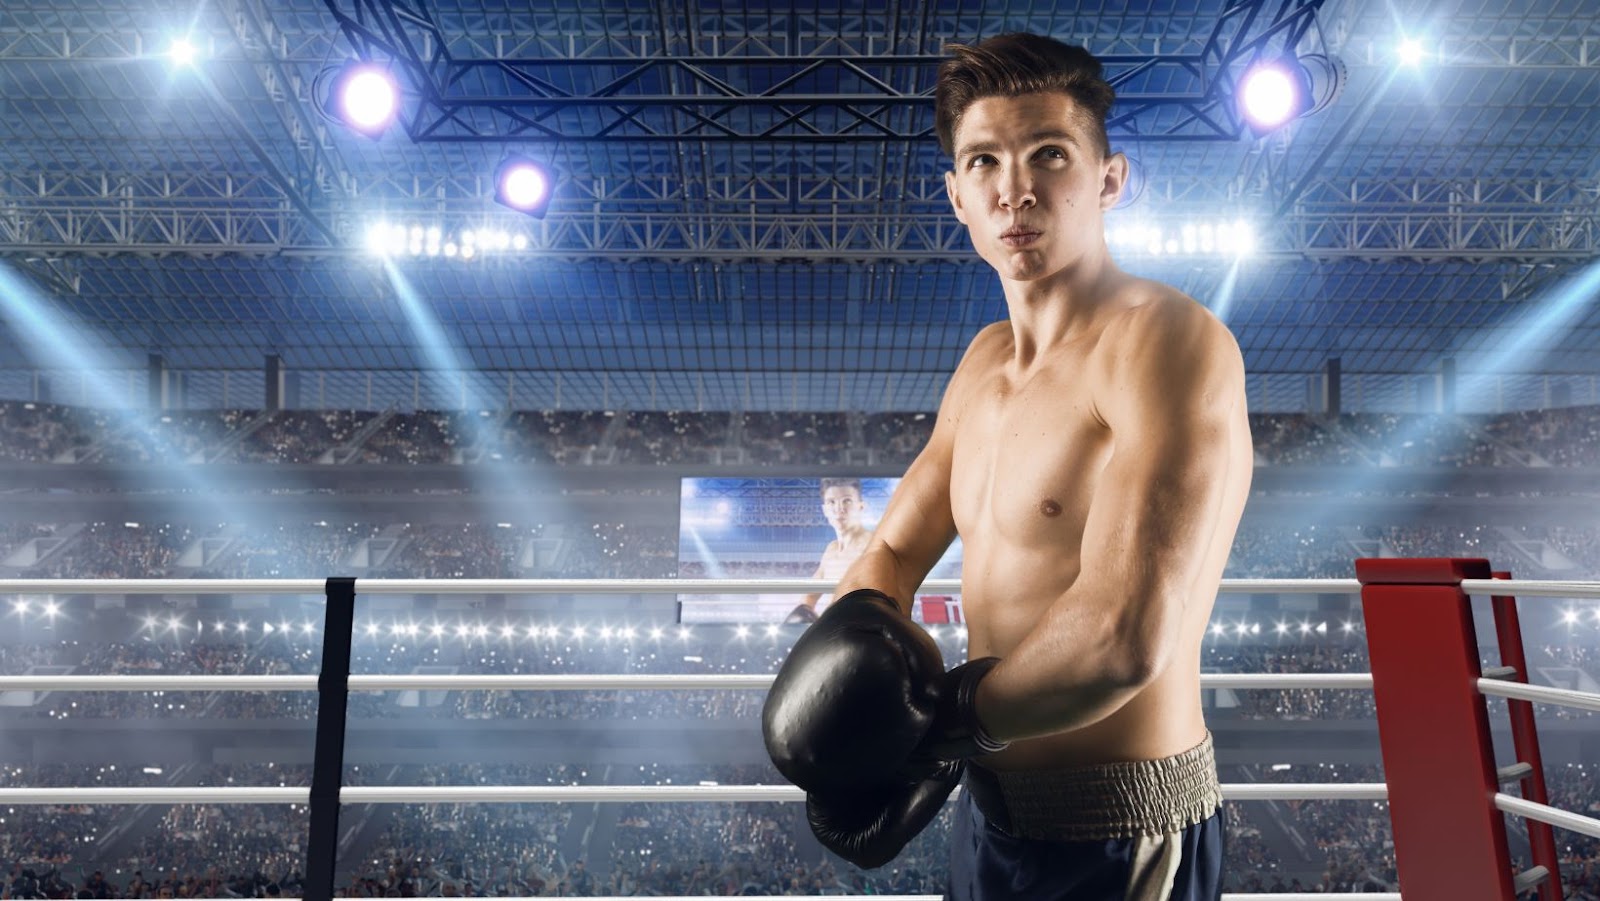 The Impact of Olympic Boxing on Society